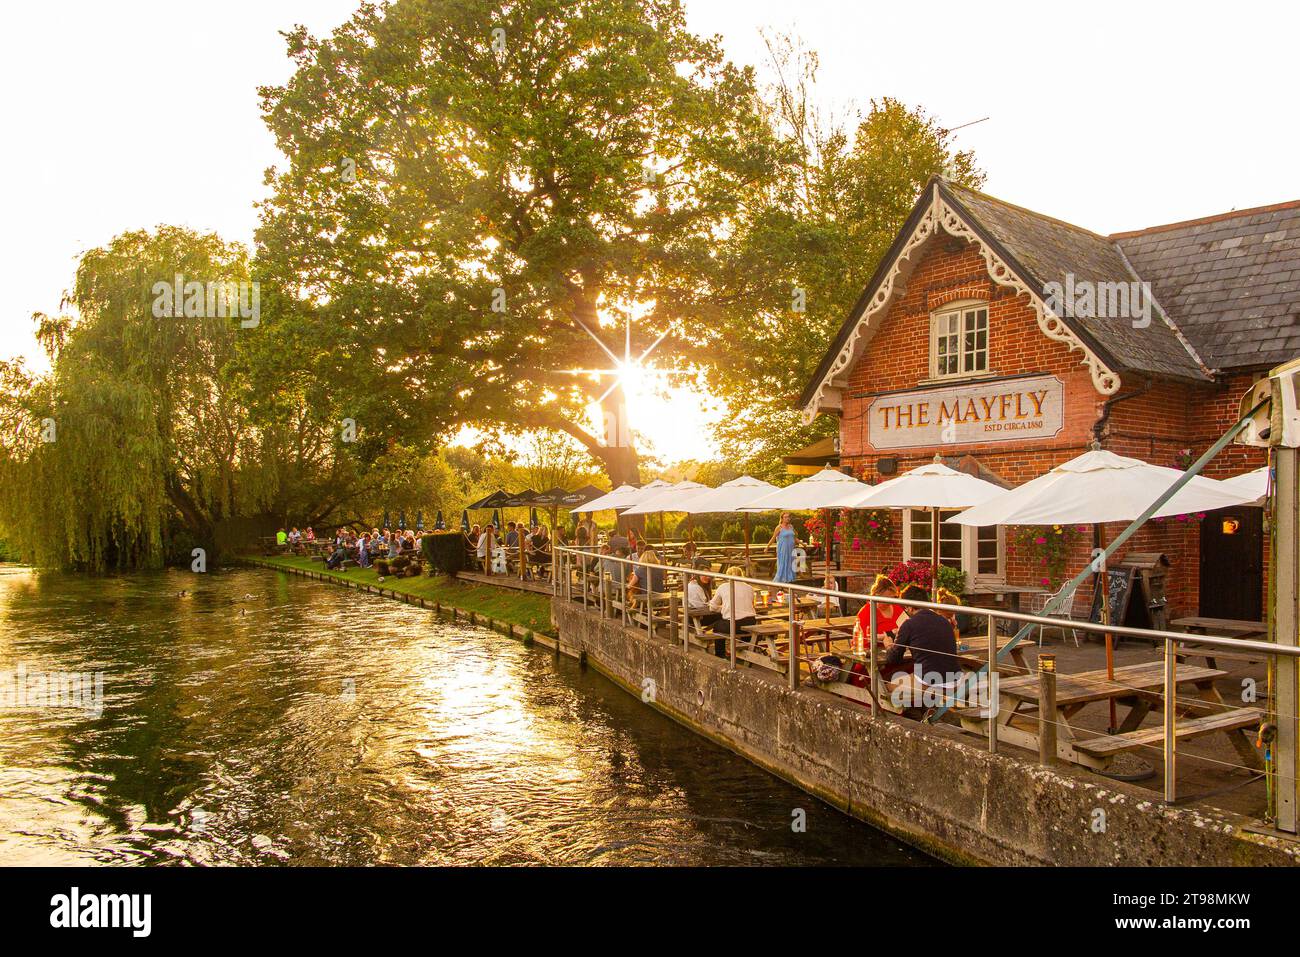 The famous Mayfly Pub on the banks of the River Test in Hampshire, England Stock Photo